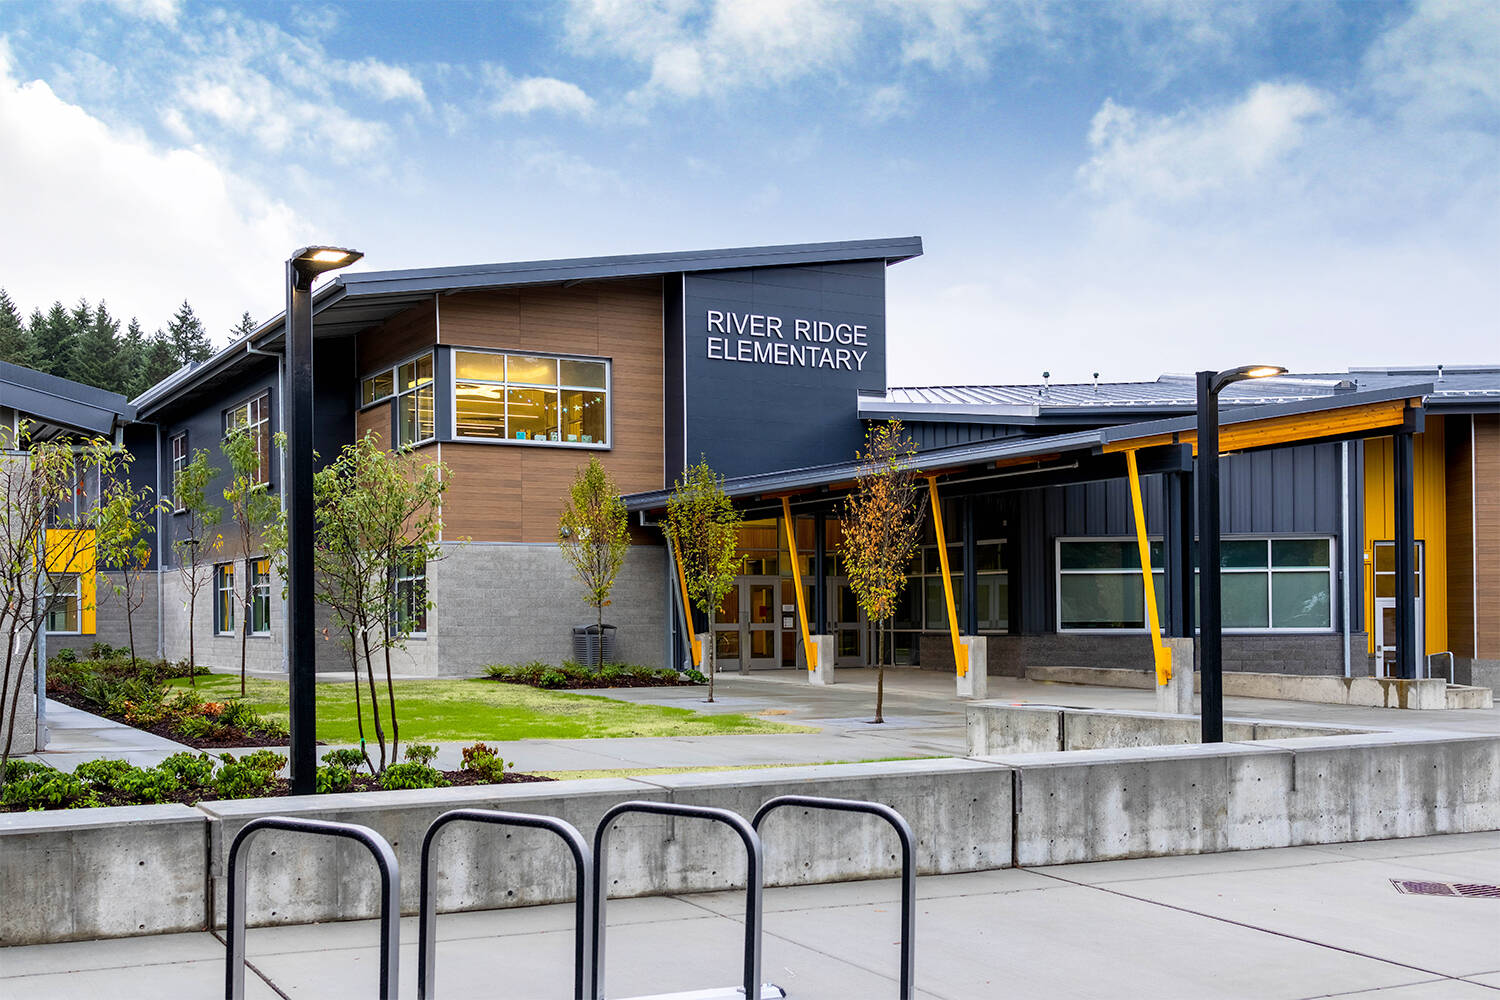 A bond measure approved by Kent School District voters in 2016 paid for the construction of the new River Ridge Elementary that opened in 2021. That measure boosted property taxes that Kent residents are paying over a 10-year period. COURTESY PHOTO, Kent School District